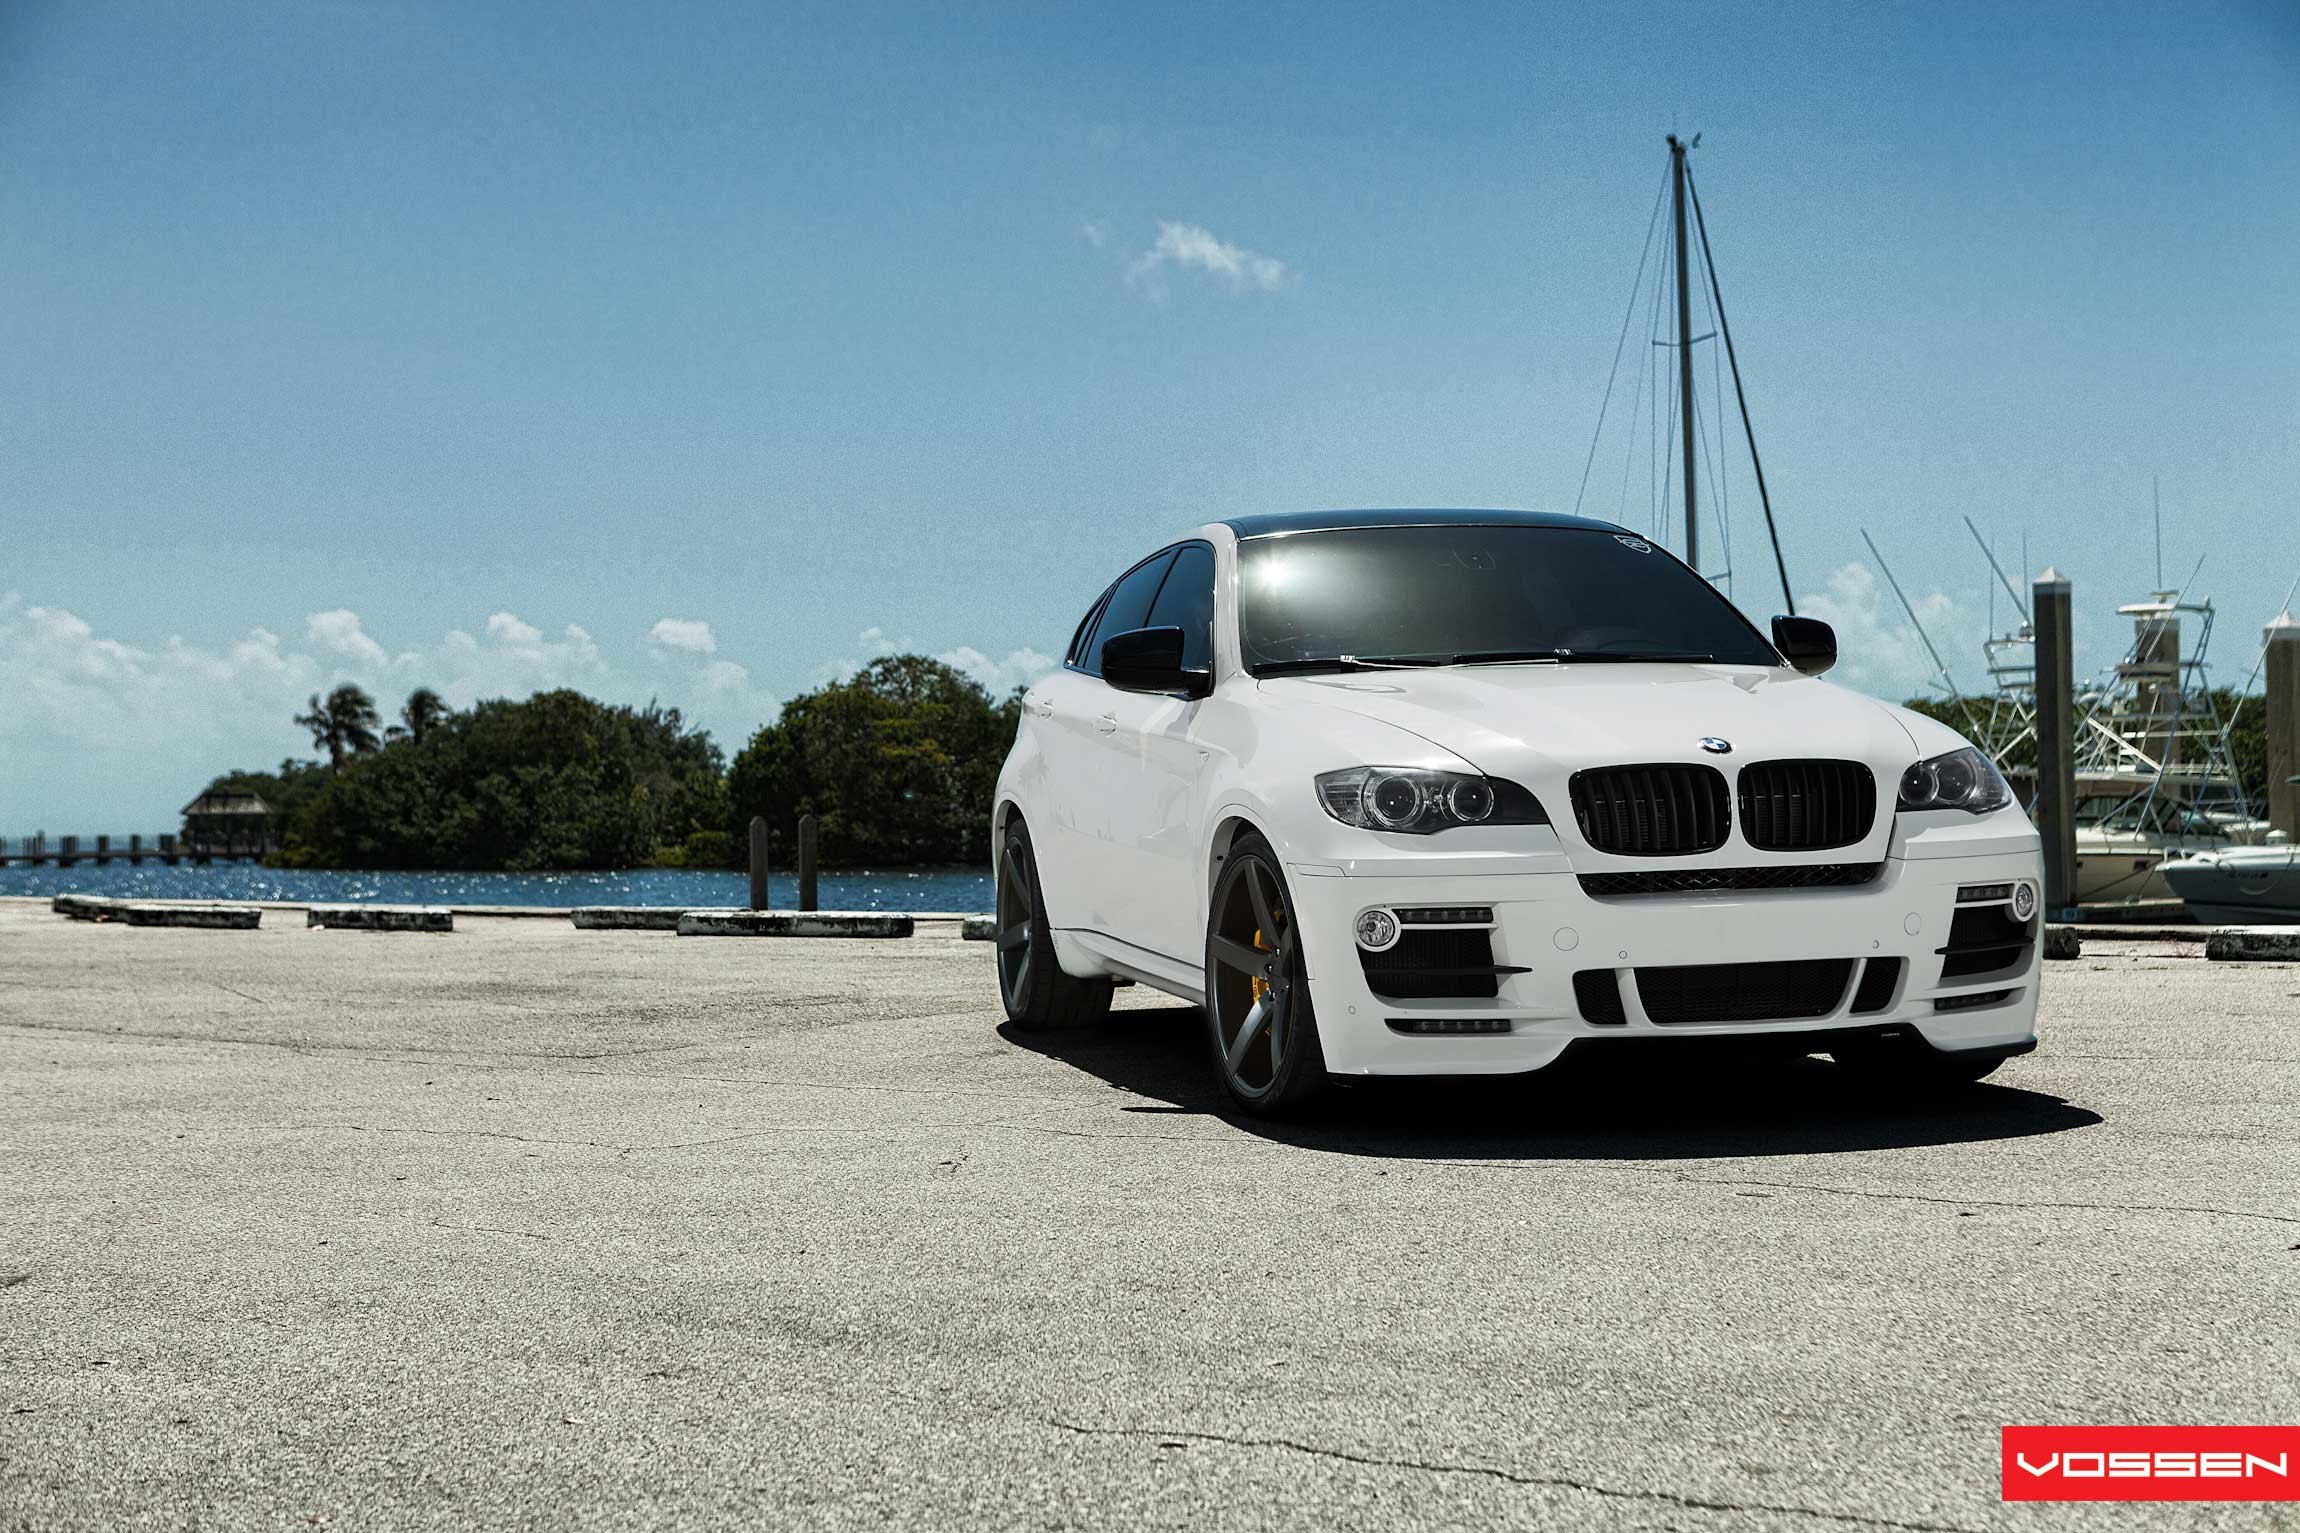 Custom Front Bumper with Fog Lights on White BMW X6 - Photo by Vossen